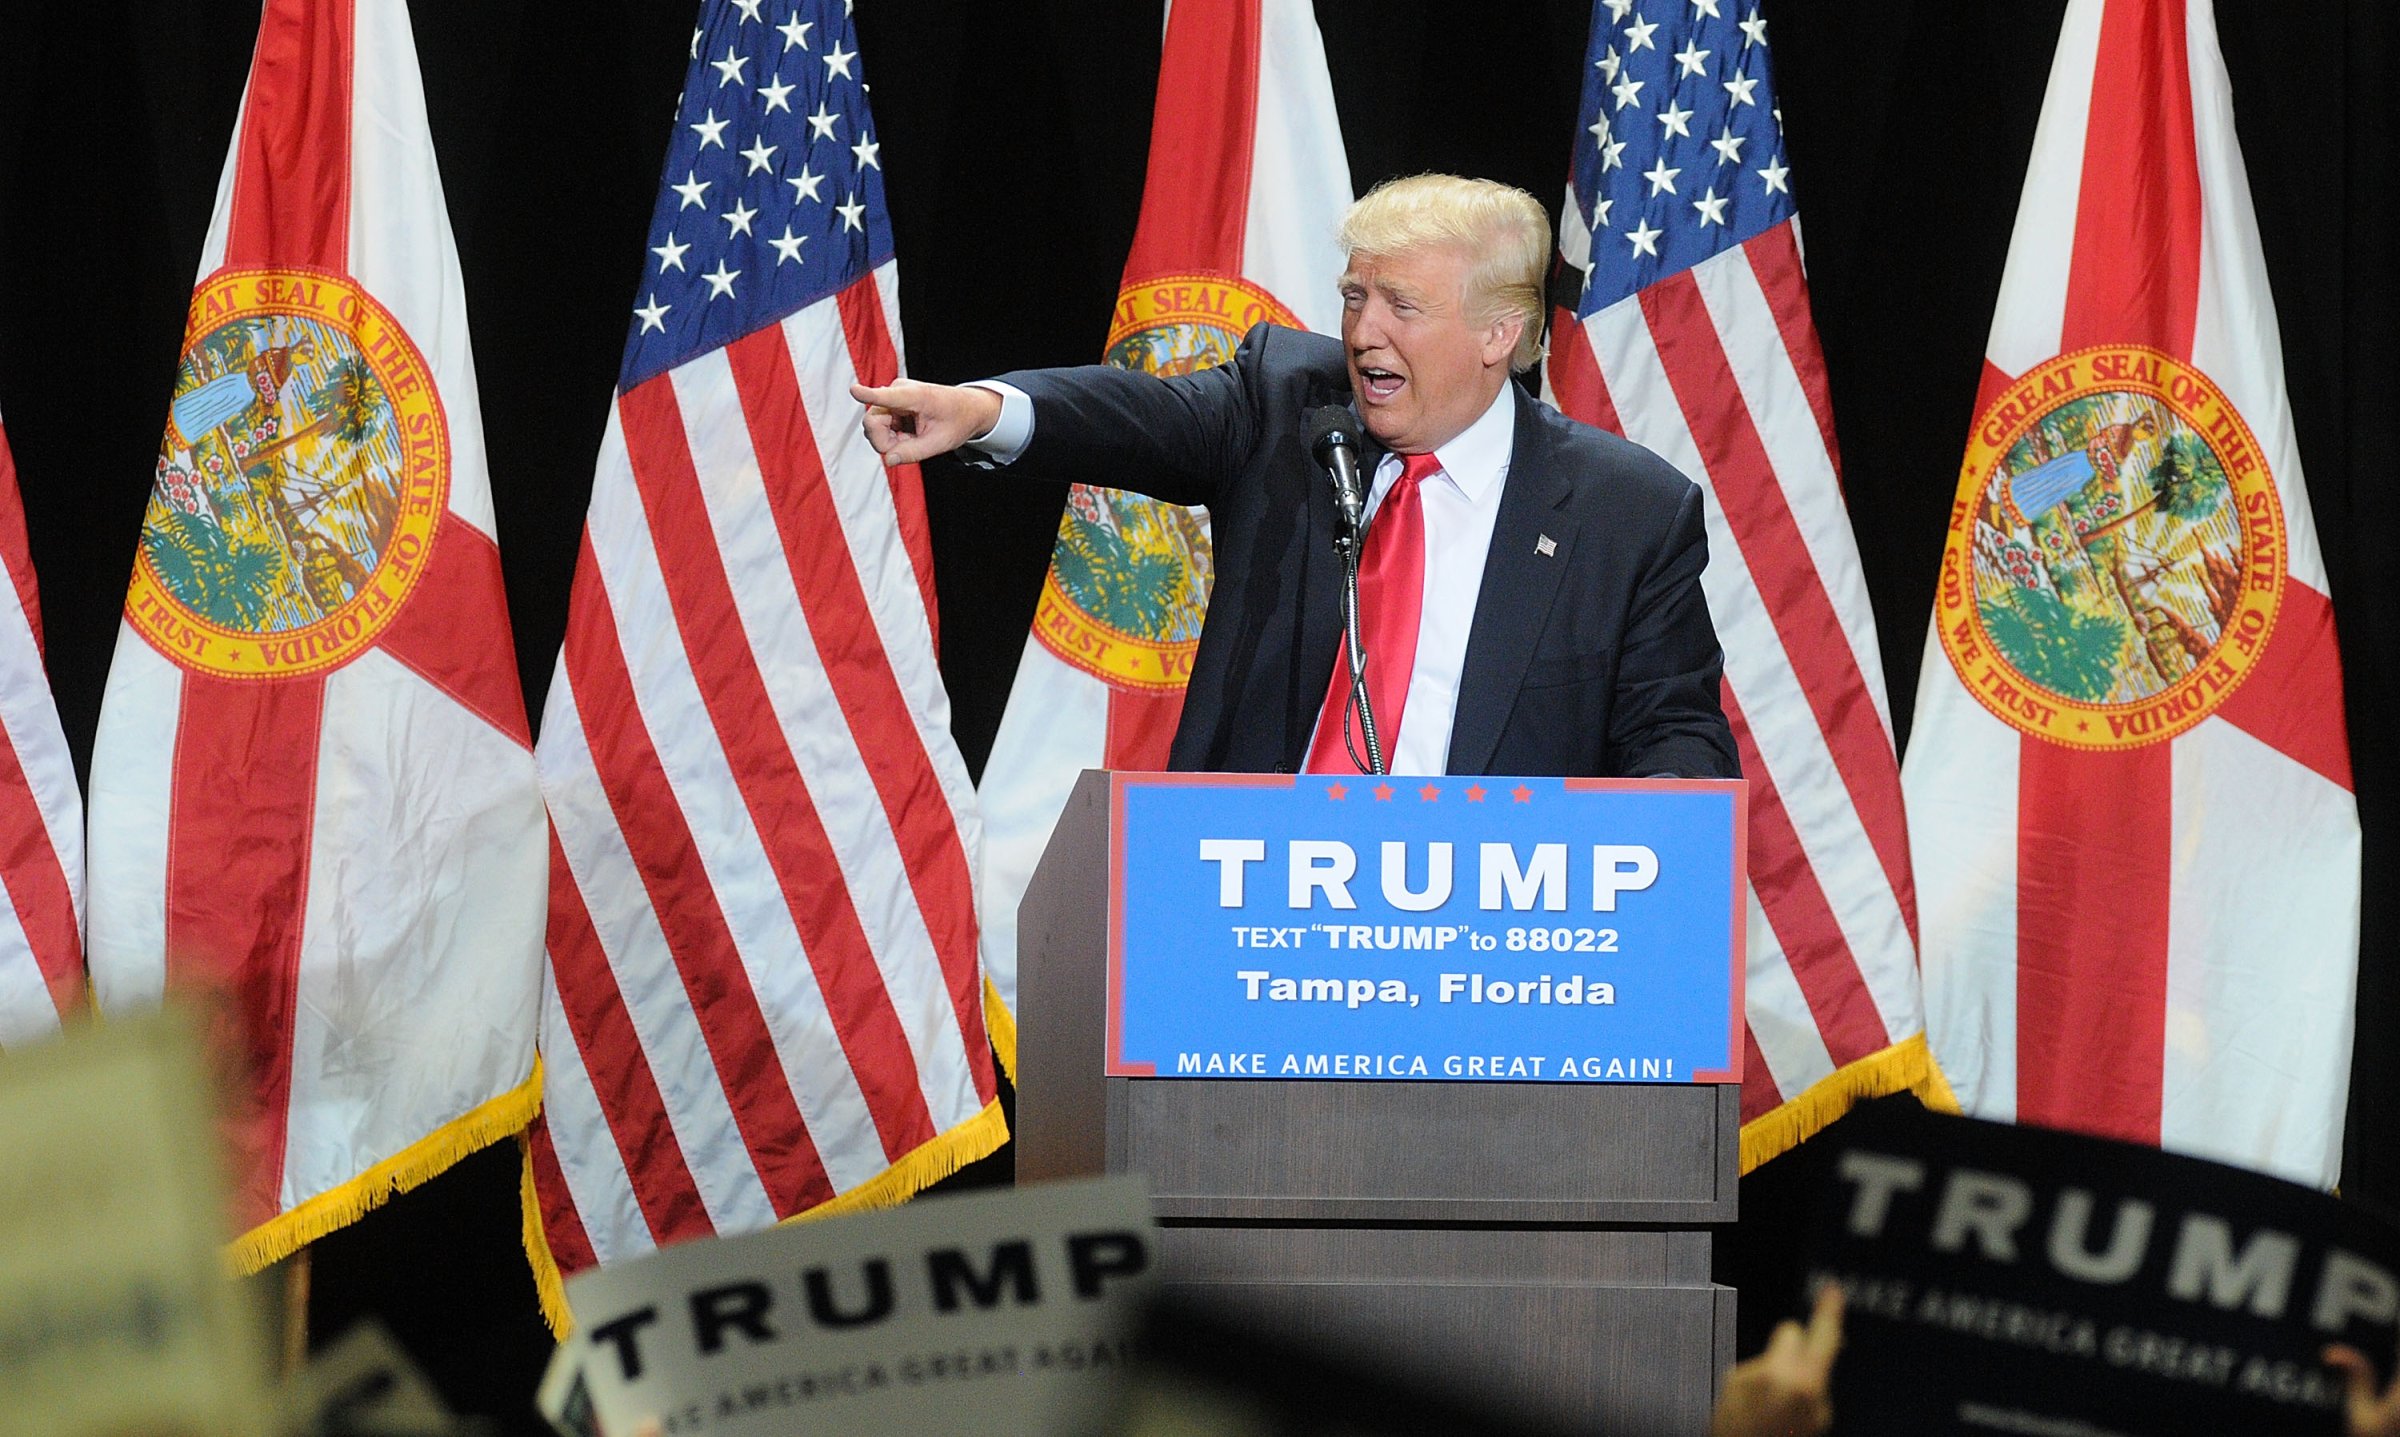 Donald Trump speaks during a campaign rally at the Tampa Convention Center on June 11, 2016 in Tampa, Fla.